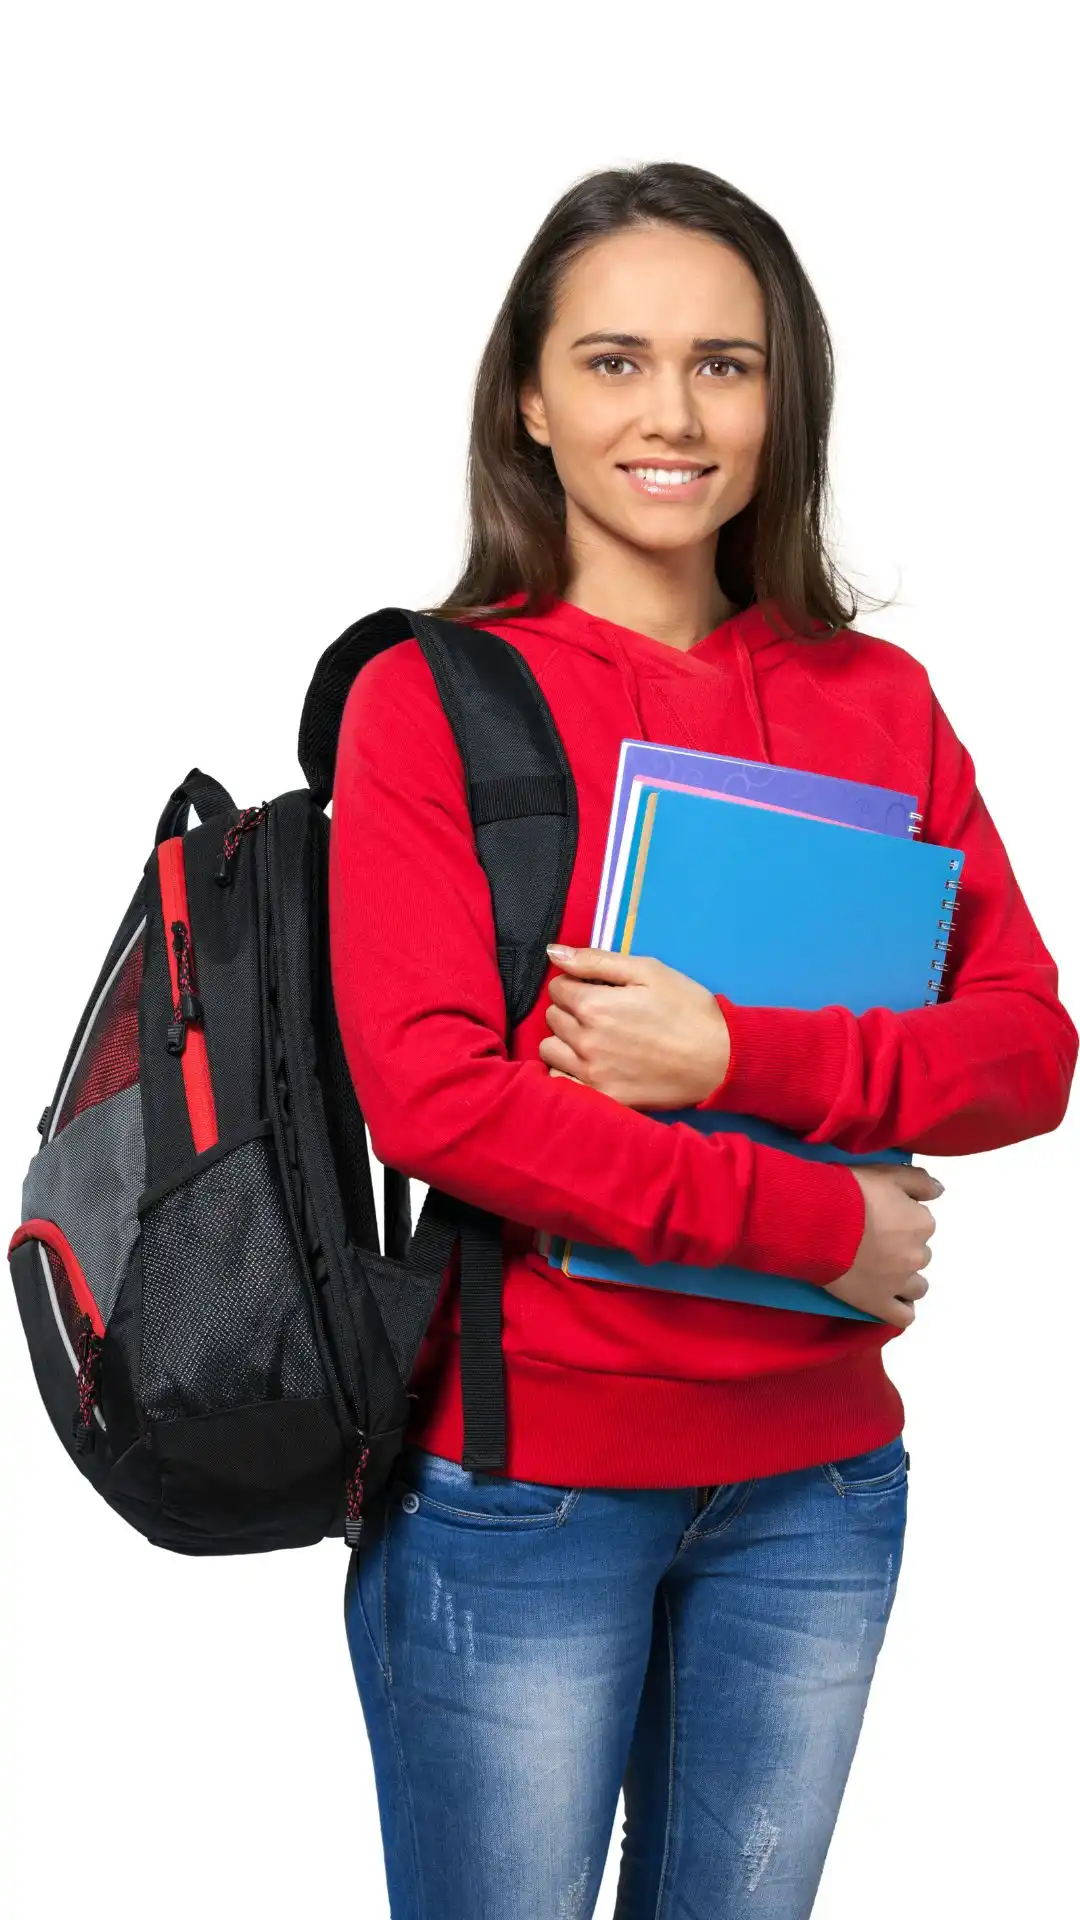 English assignment writing - why students choose our assignment help